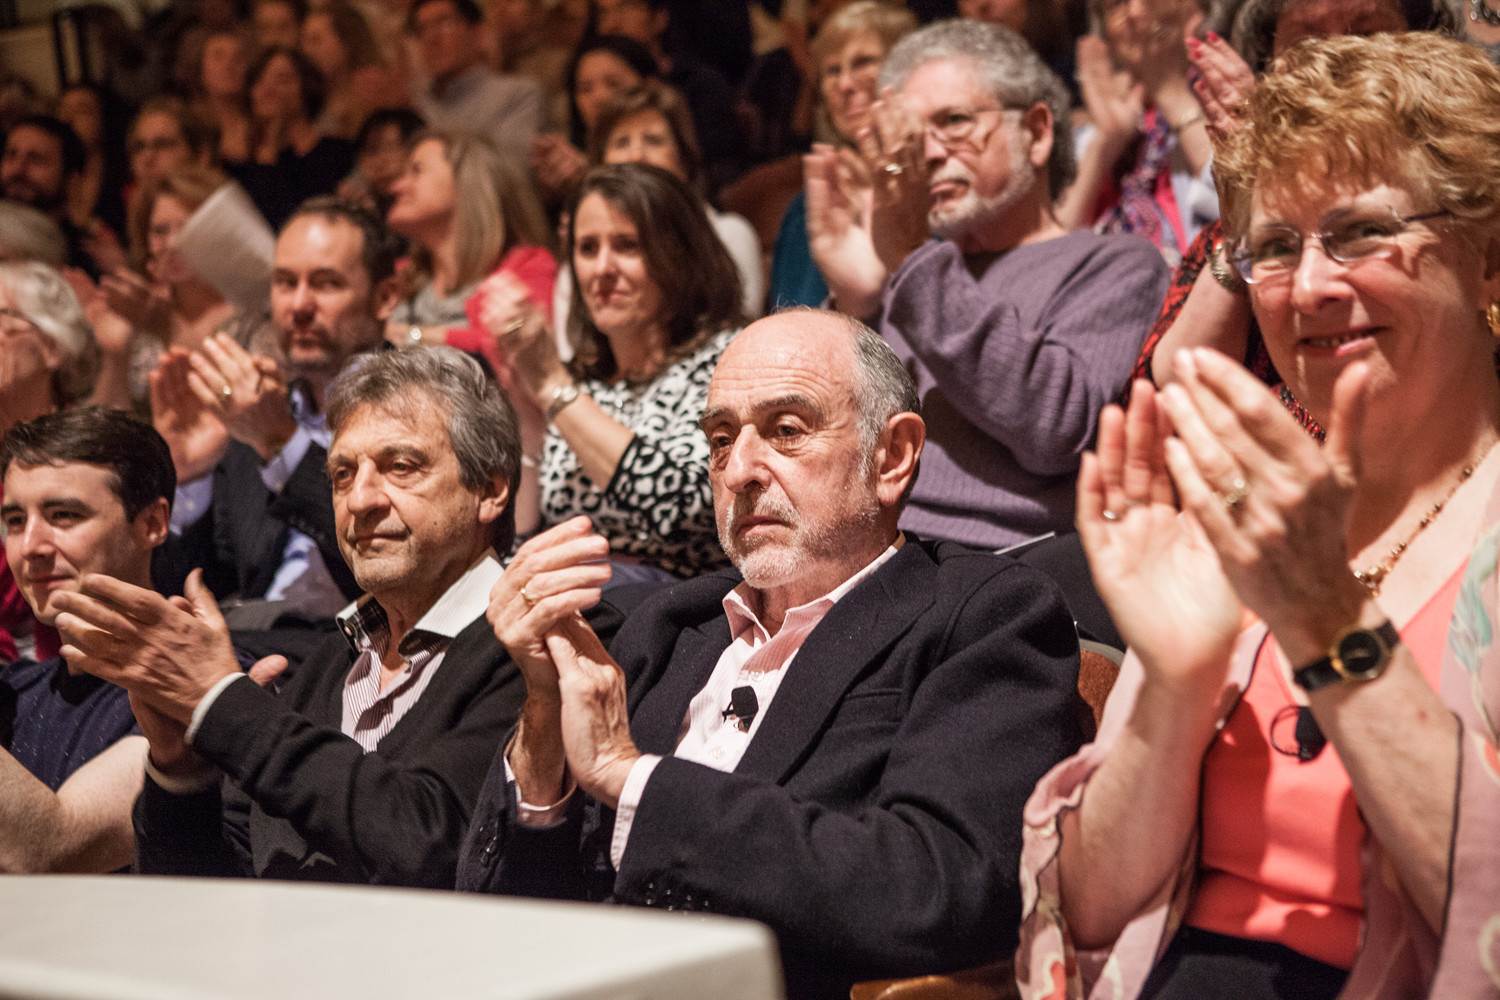 Alain Boublil, center left, and Claude-Michel Schönberg, center right, applaud a performance of their music.